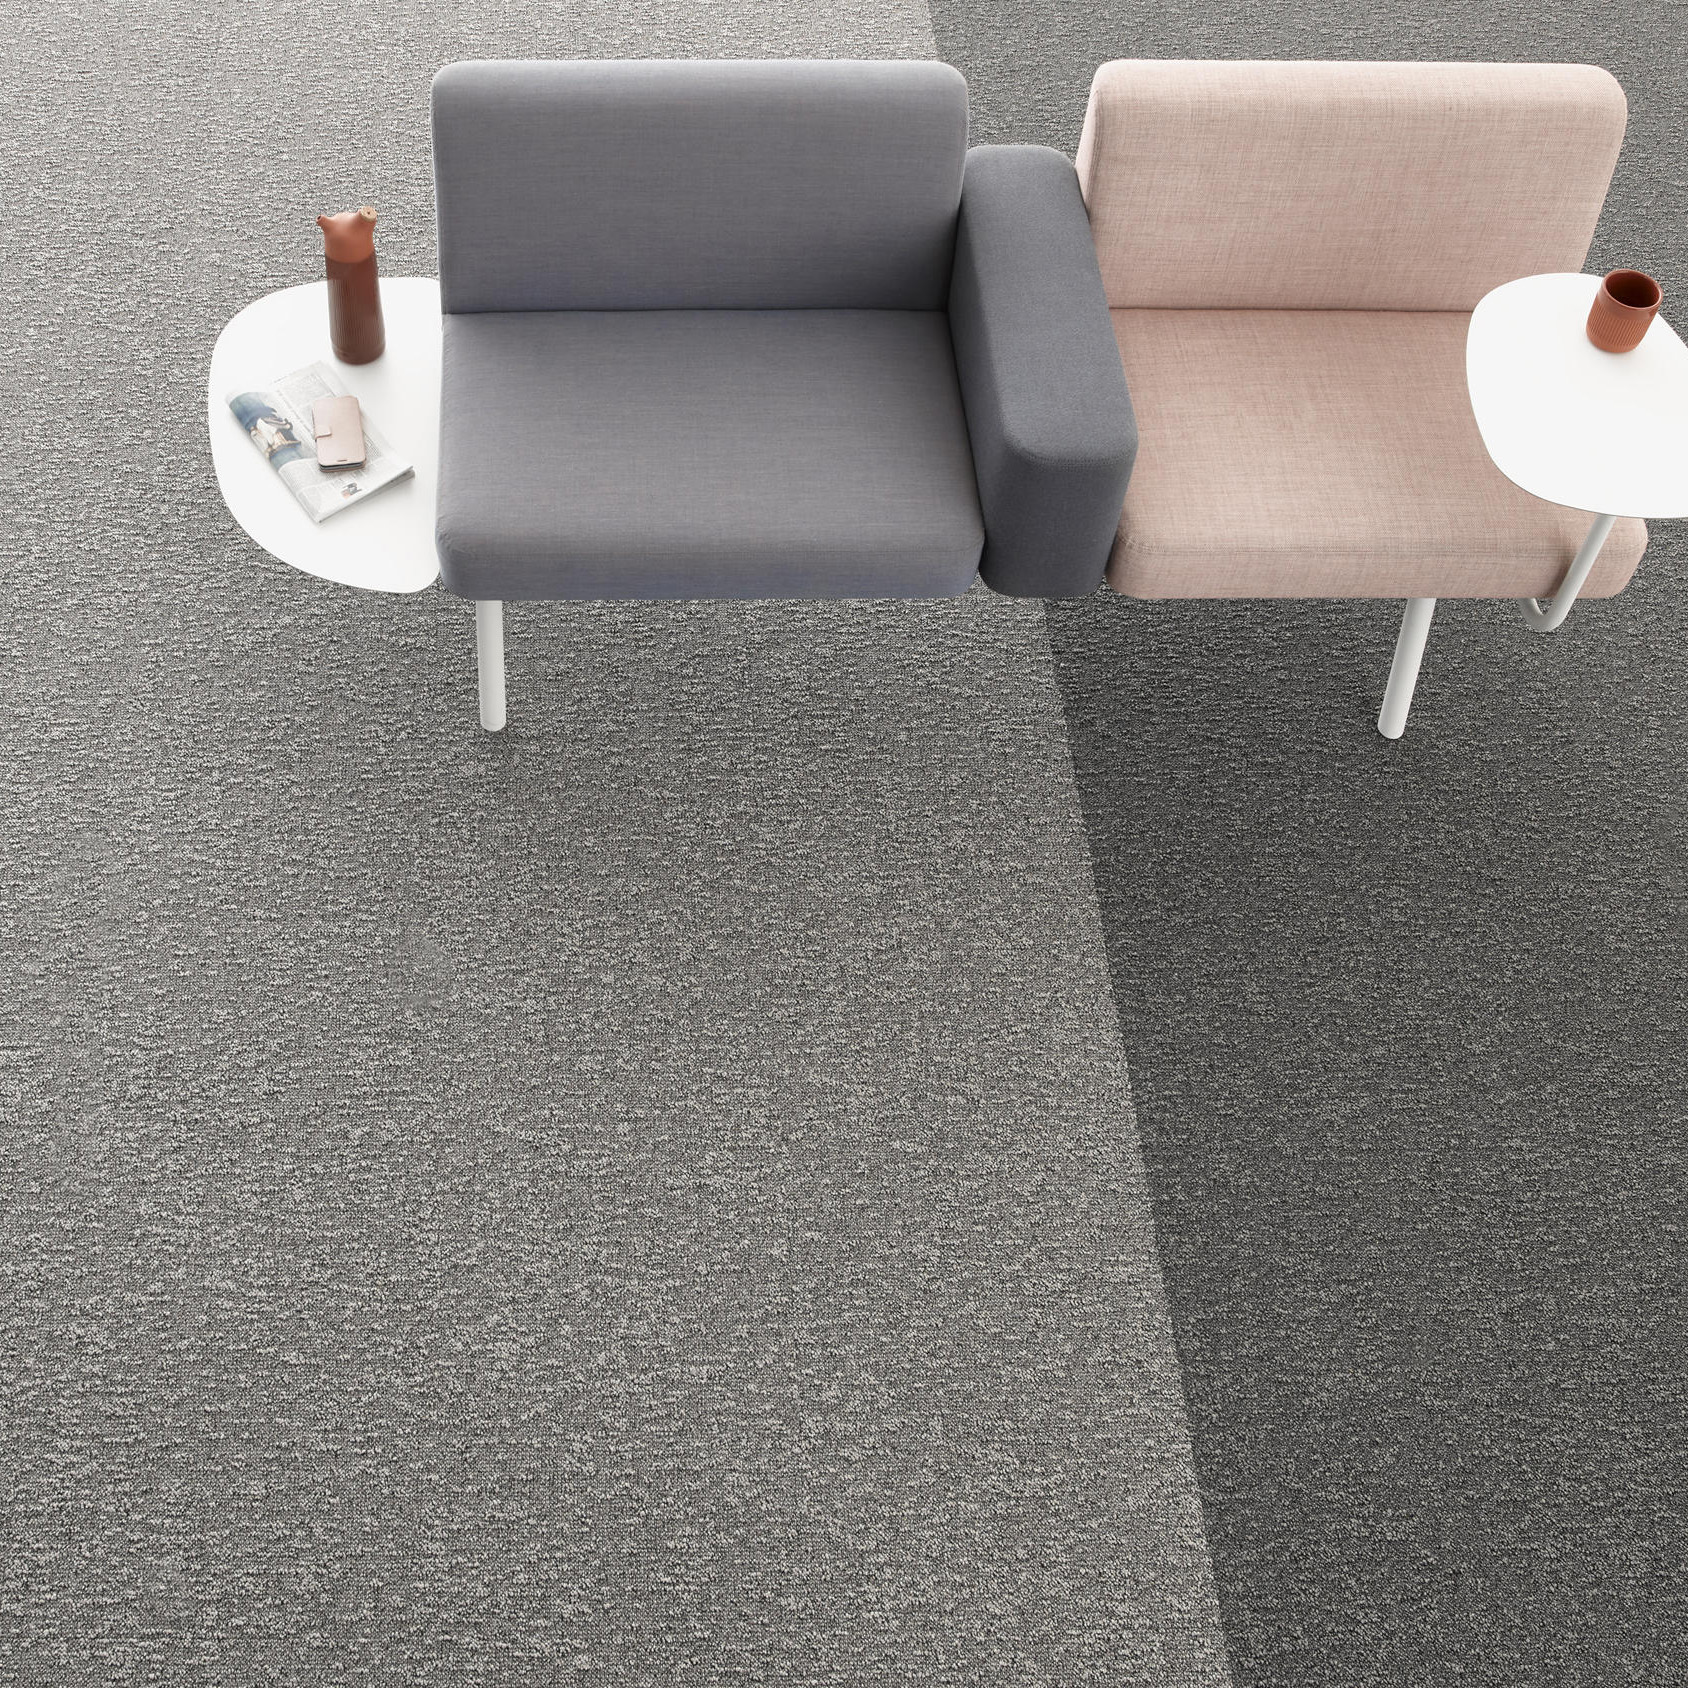 Desso Airmaster Earth Carpet Tile used in modern office space with dark grey and pink interior